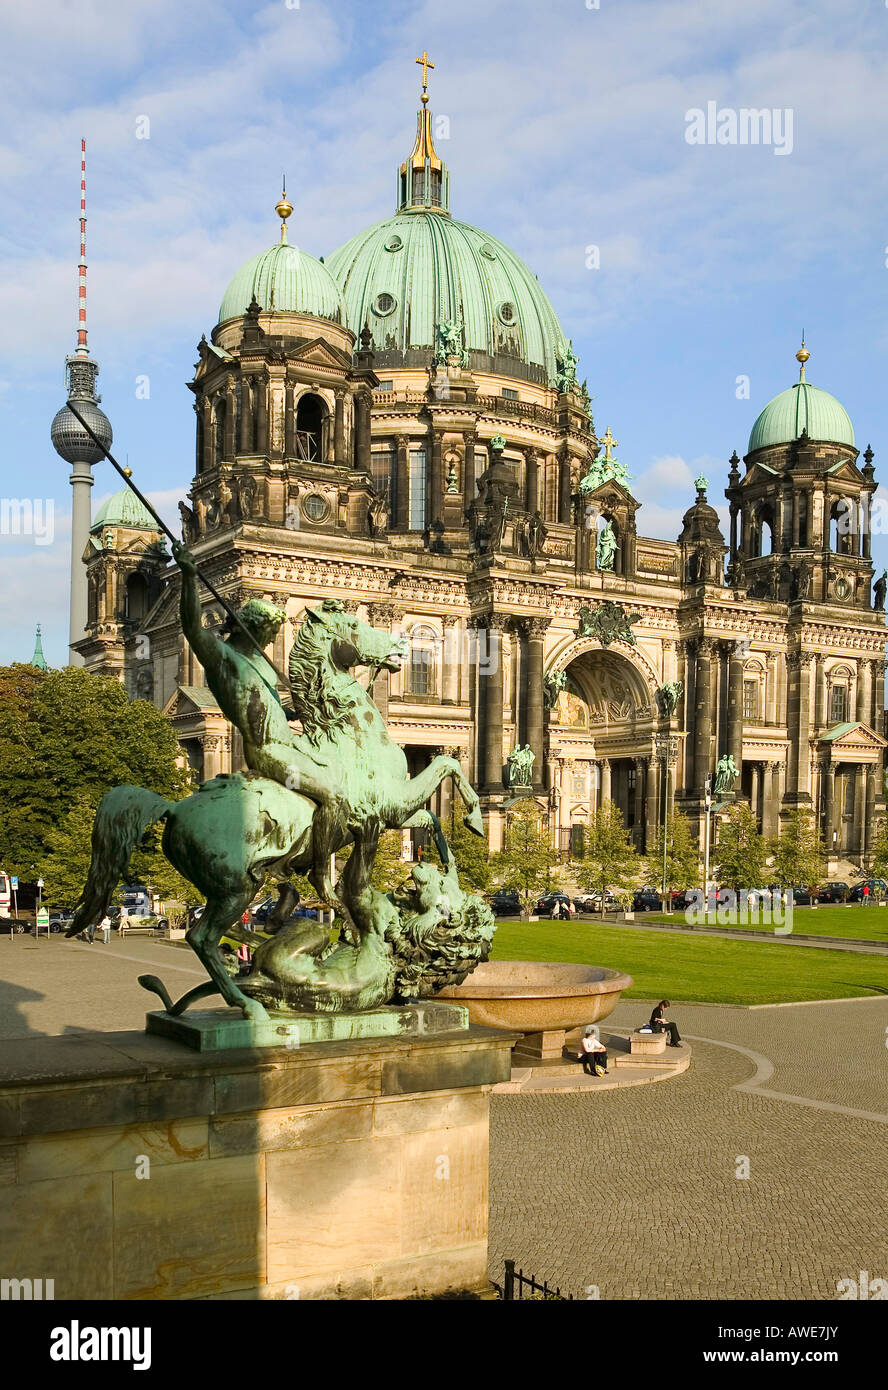 Berliner Dom church church horse architecture Berlin Germany Europe capital city cathedral architecture dome sight square Stock Photo